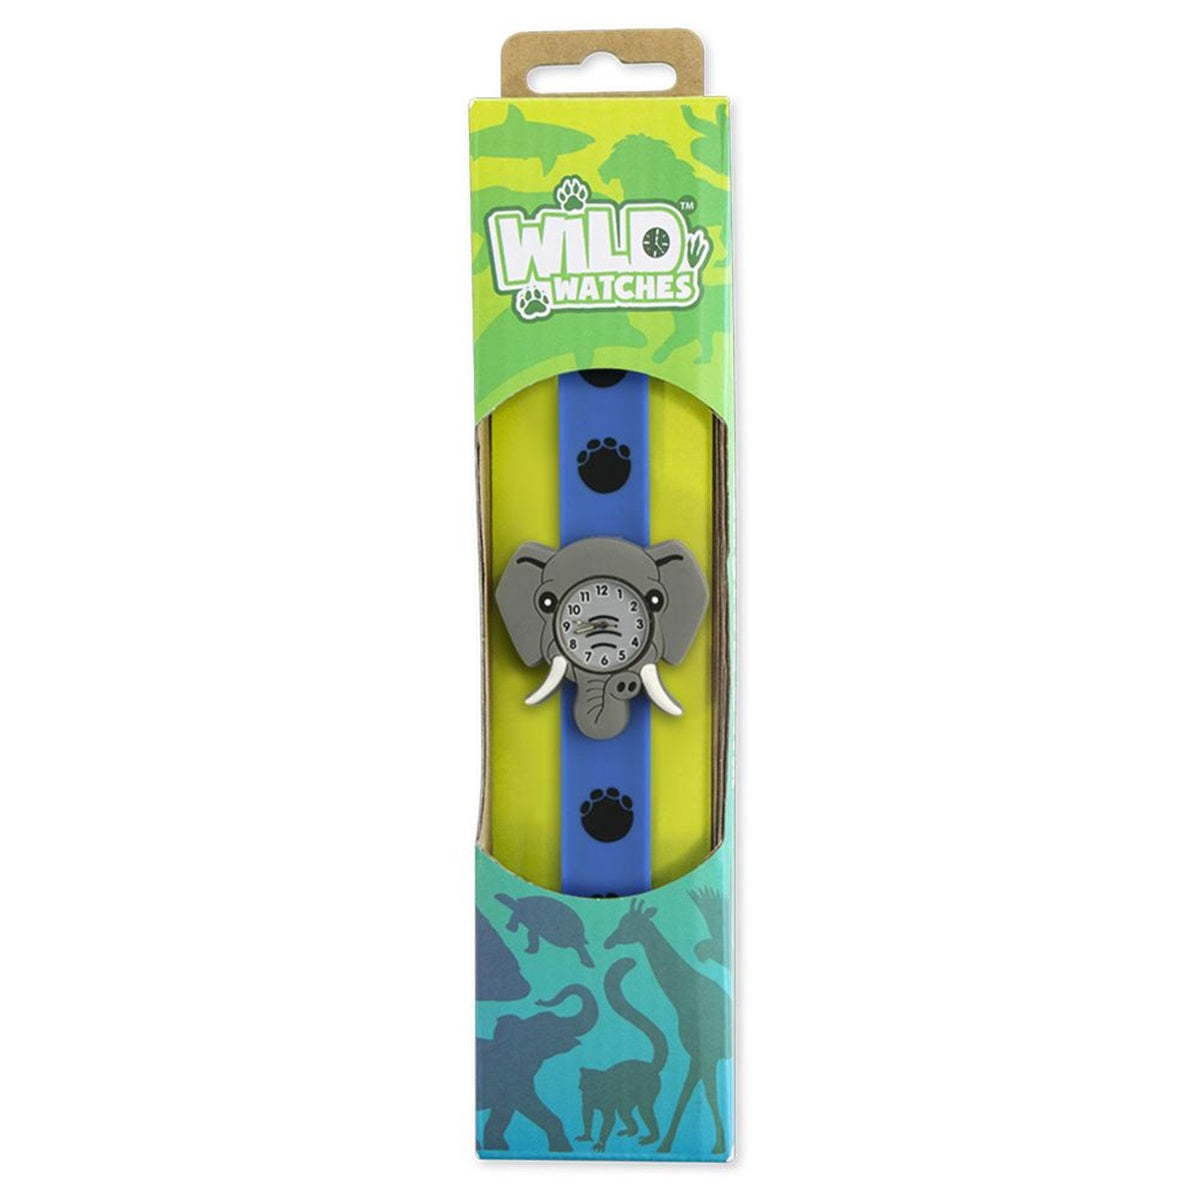 Wild Watches Elephant Snap Band Watch